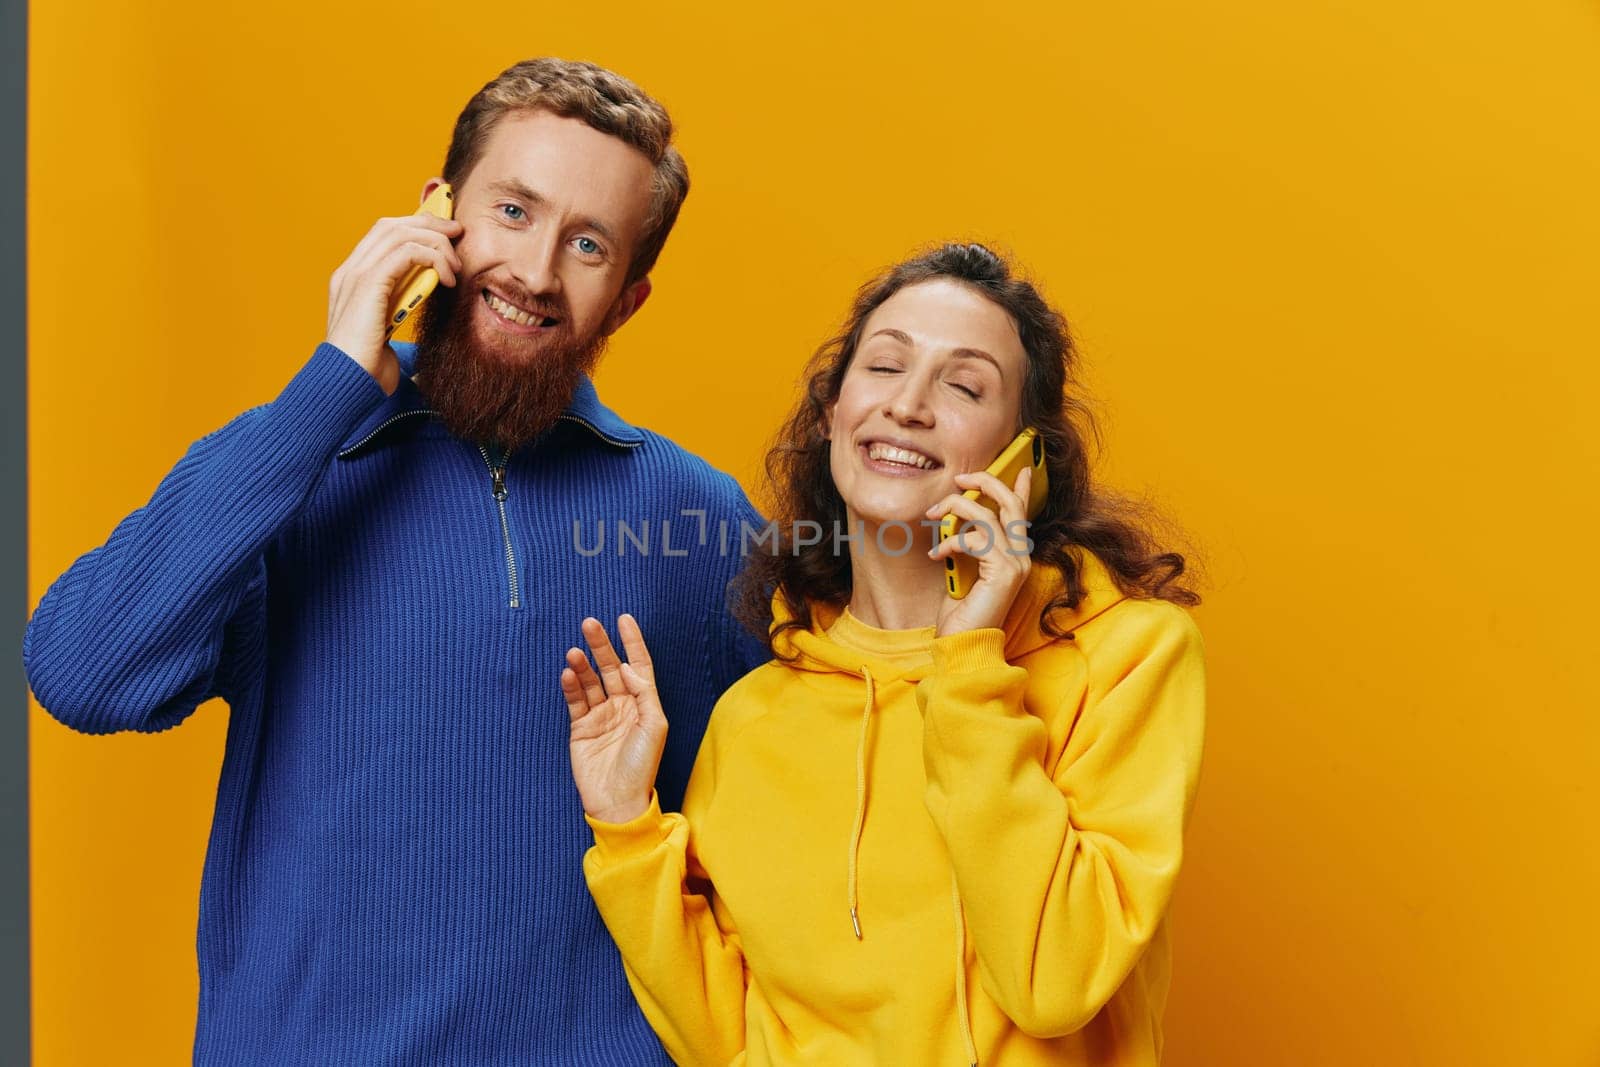 Woman and man cheerful couple with phones in hand talking on cell phone crooked smile cheerful, on yellow background. The concept of real family relationships, talking on the phone, work online. by SHOTPRIME